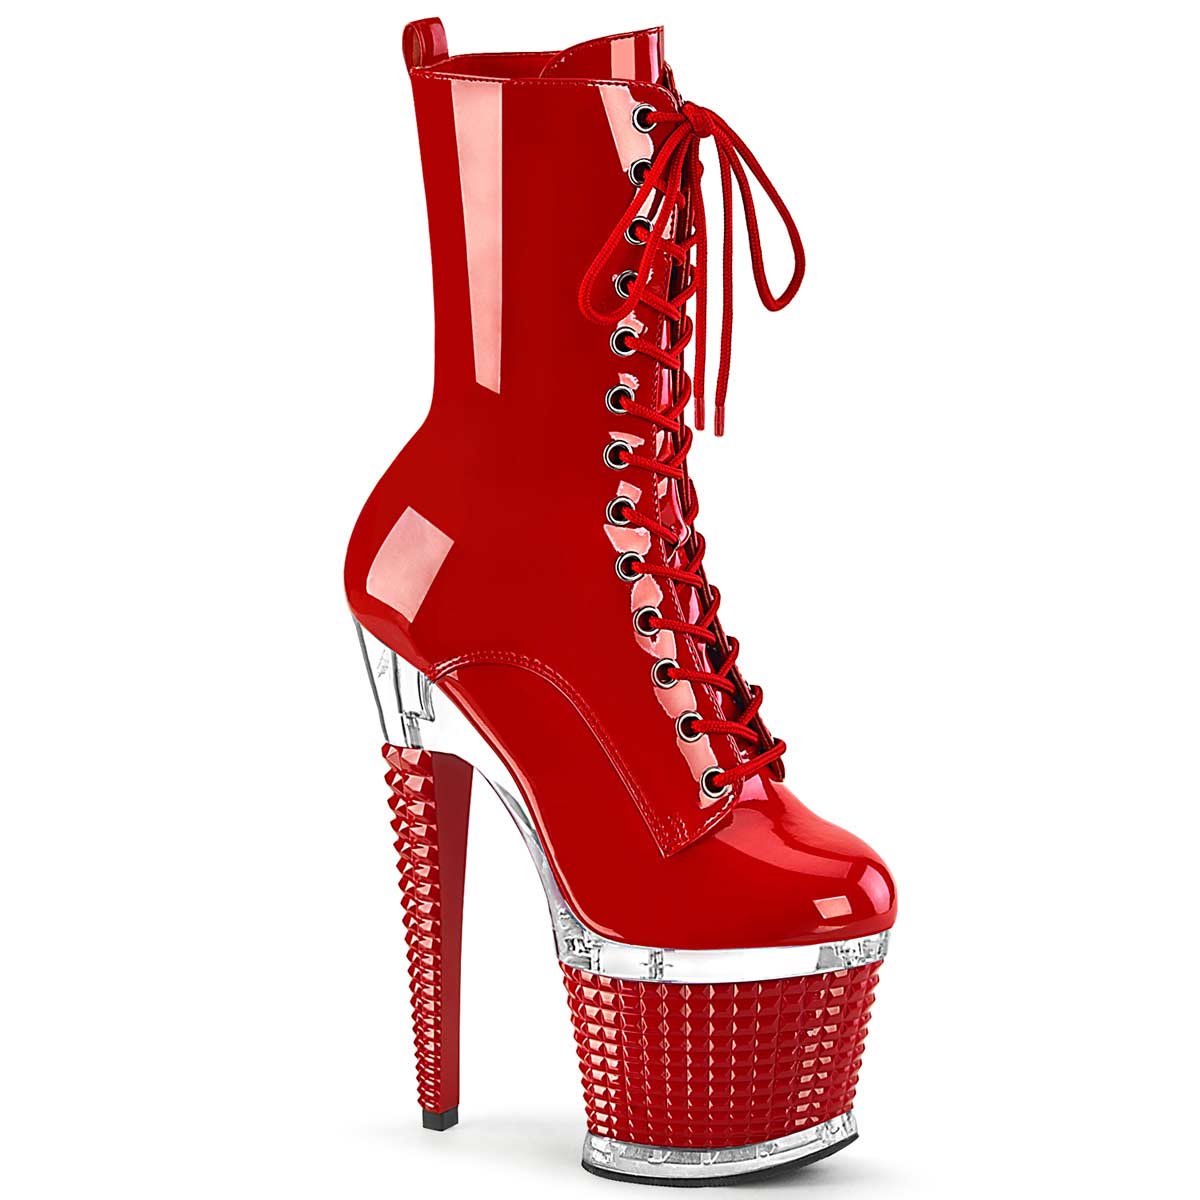 Pleaser Spectator-1040 - Red Clear in Sexy Boots - $54.55